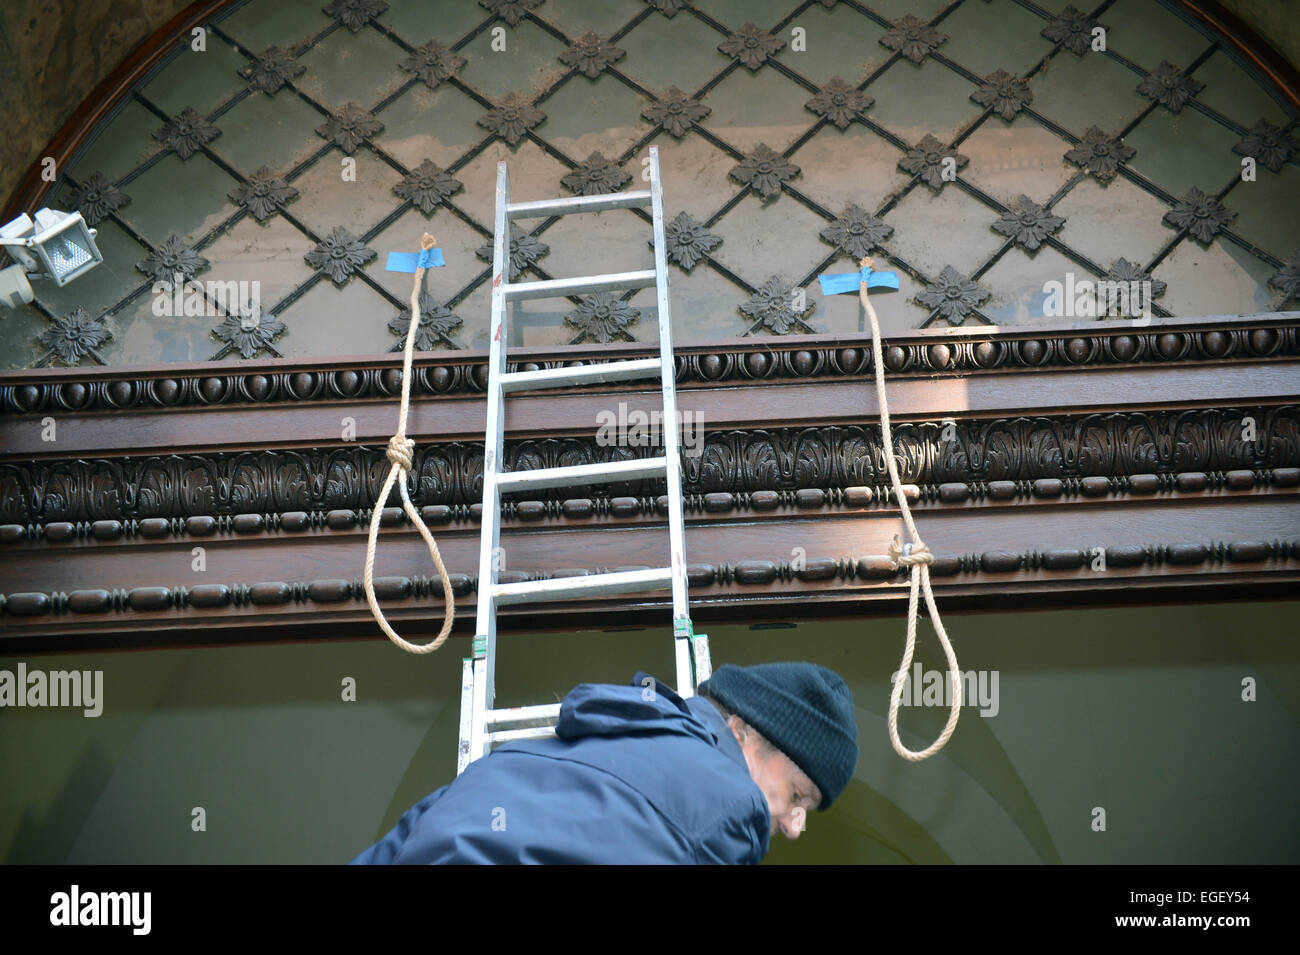 Prague, Czech Republic. 20th Feb, 2015. Anti-communist protest event outside Communists (KSCM) seat took place in Prague, Czech Republic, February 20, 2015. Volunteers installed gallows nooses at the entrance to the Communist Party headquarters to symbolically express their disagreement with the exhibition of former North Korean leader Kim Jong Il organized by the first deputy chairman of KSCM Petr Simunek in the headquarters of the Communists. © Michal Dolezal/CTK Photo/Alamy Live News Stock Photo